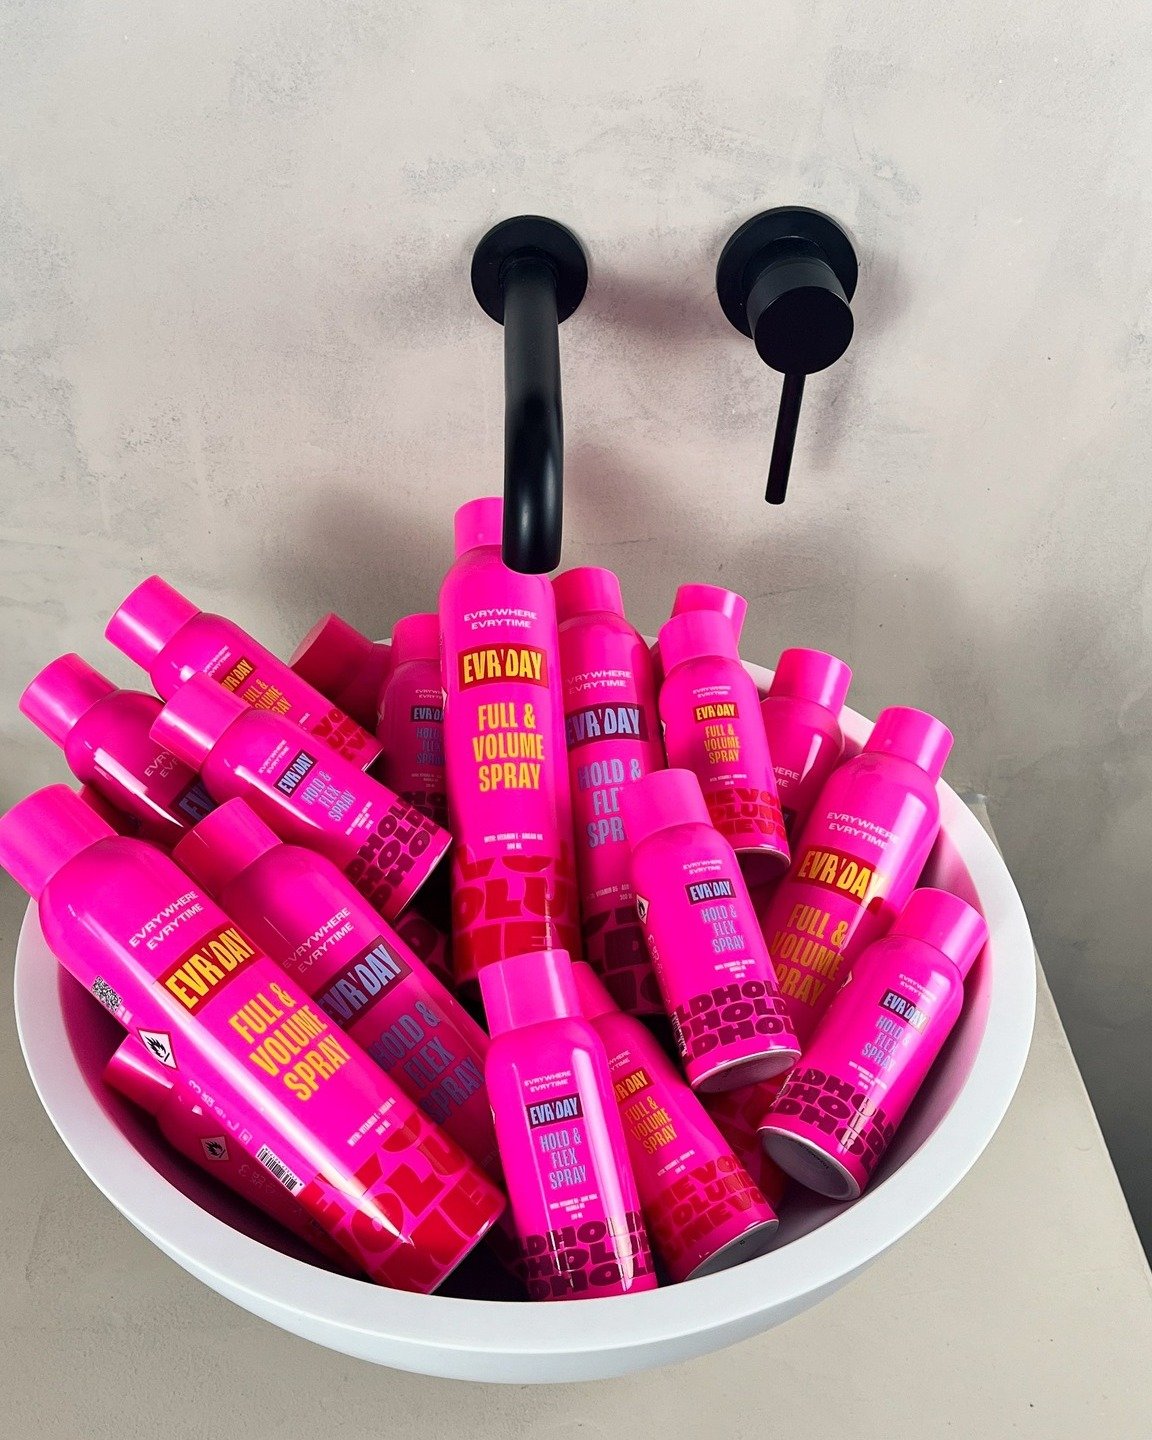 What's better than one styling product? A sink overflowing with styling goodies!